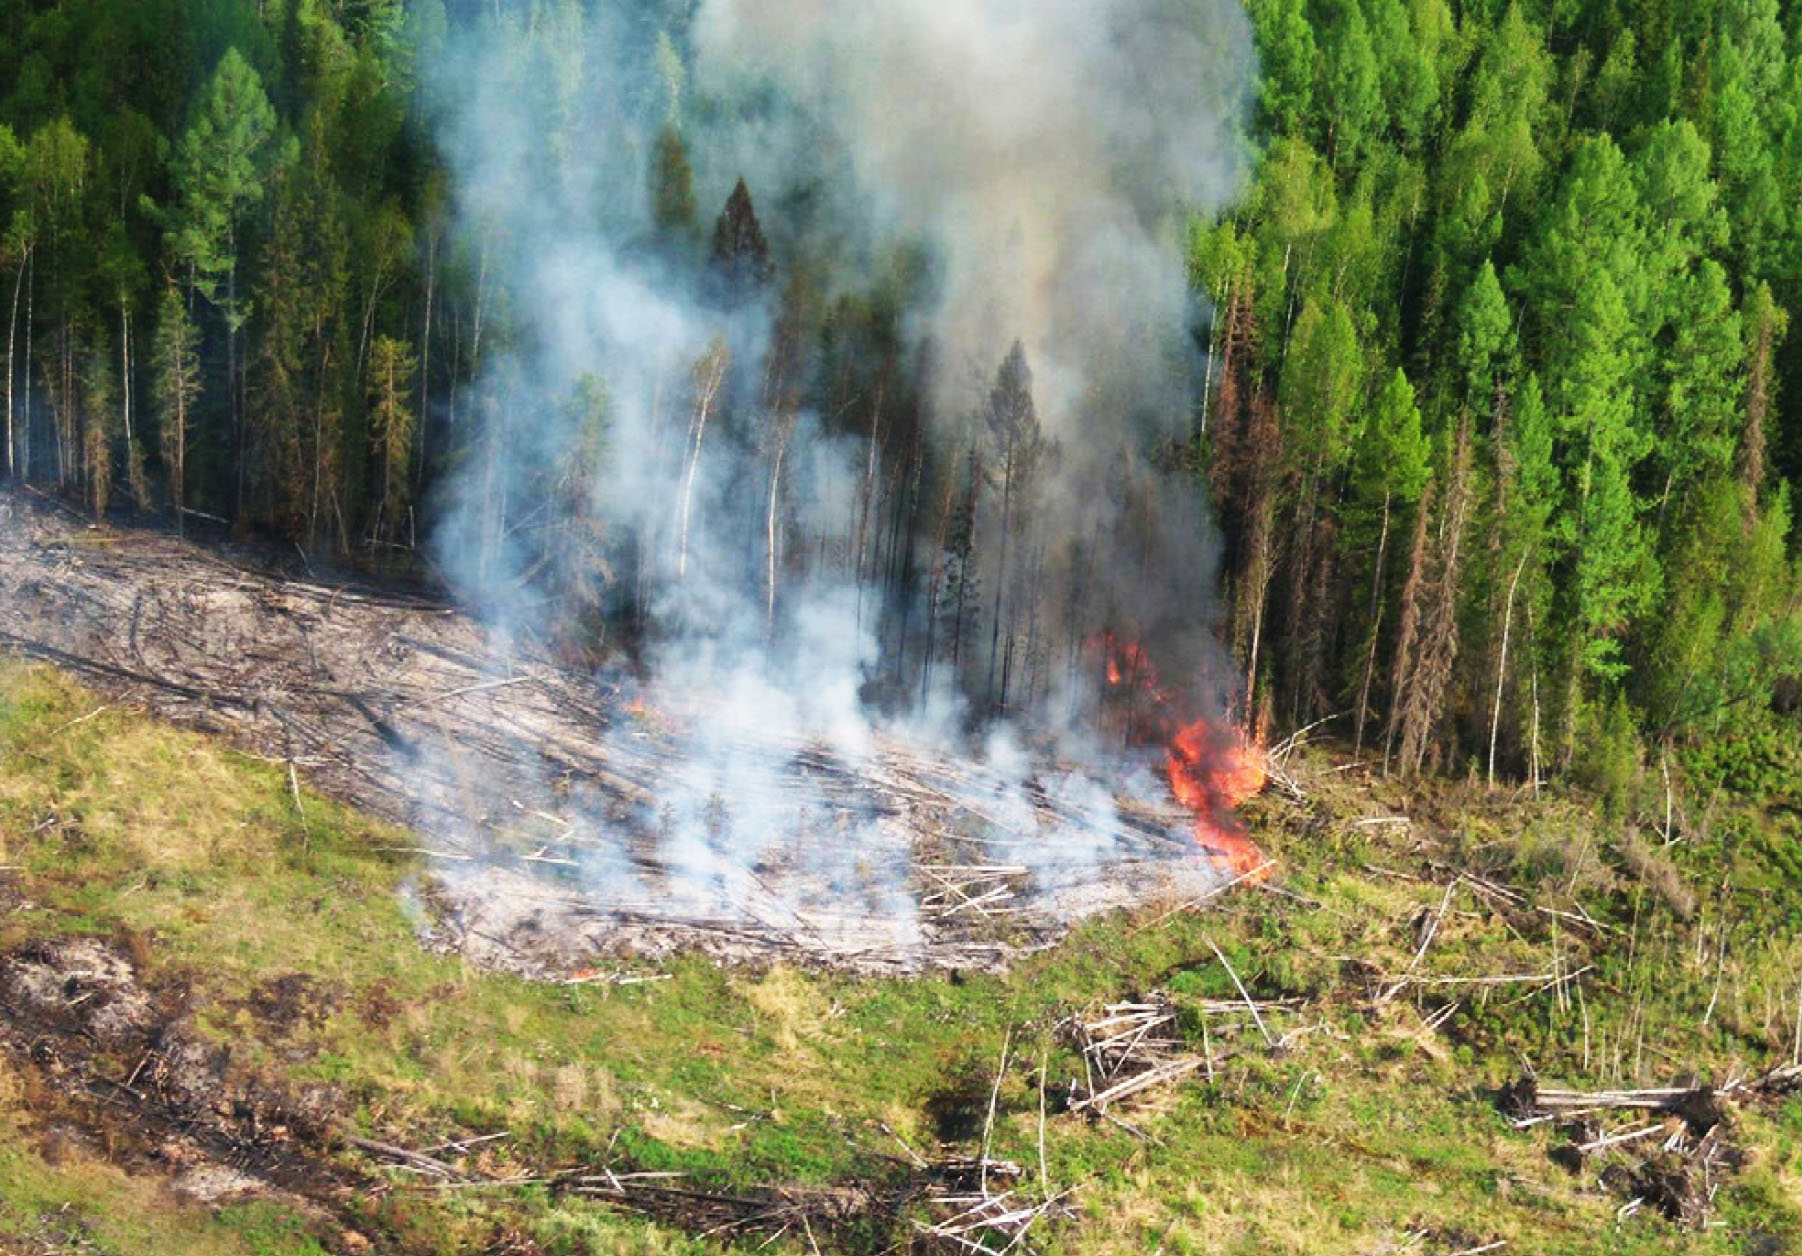 Burning of forest remnants releases CO2 into the atmosphere